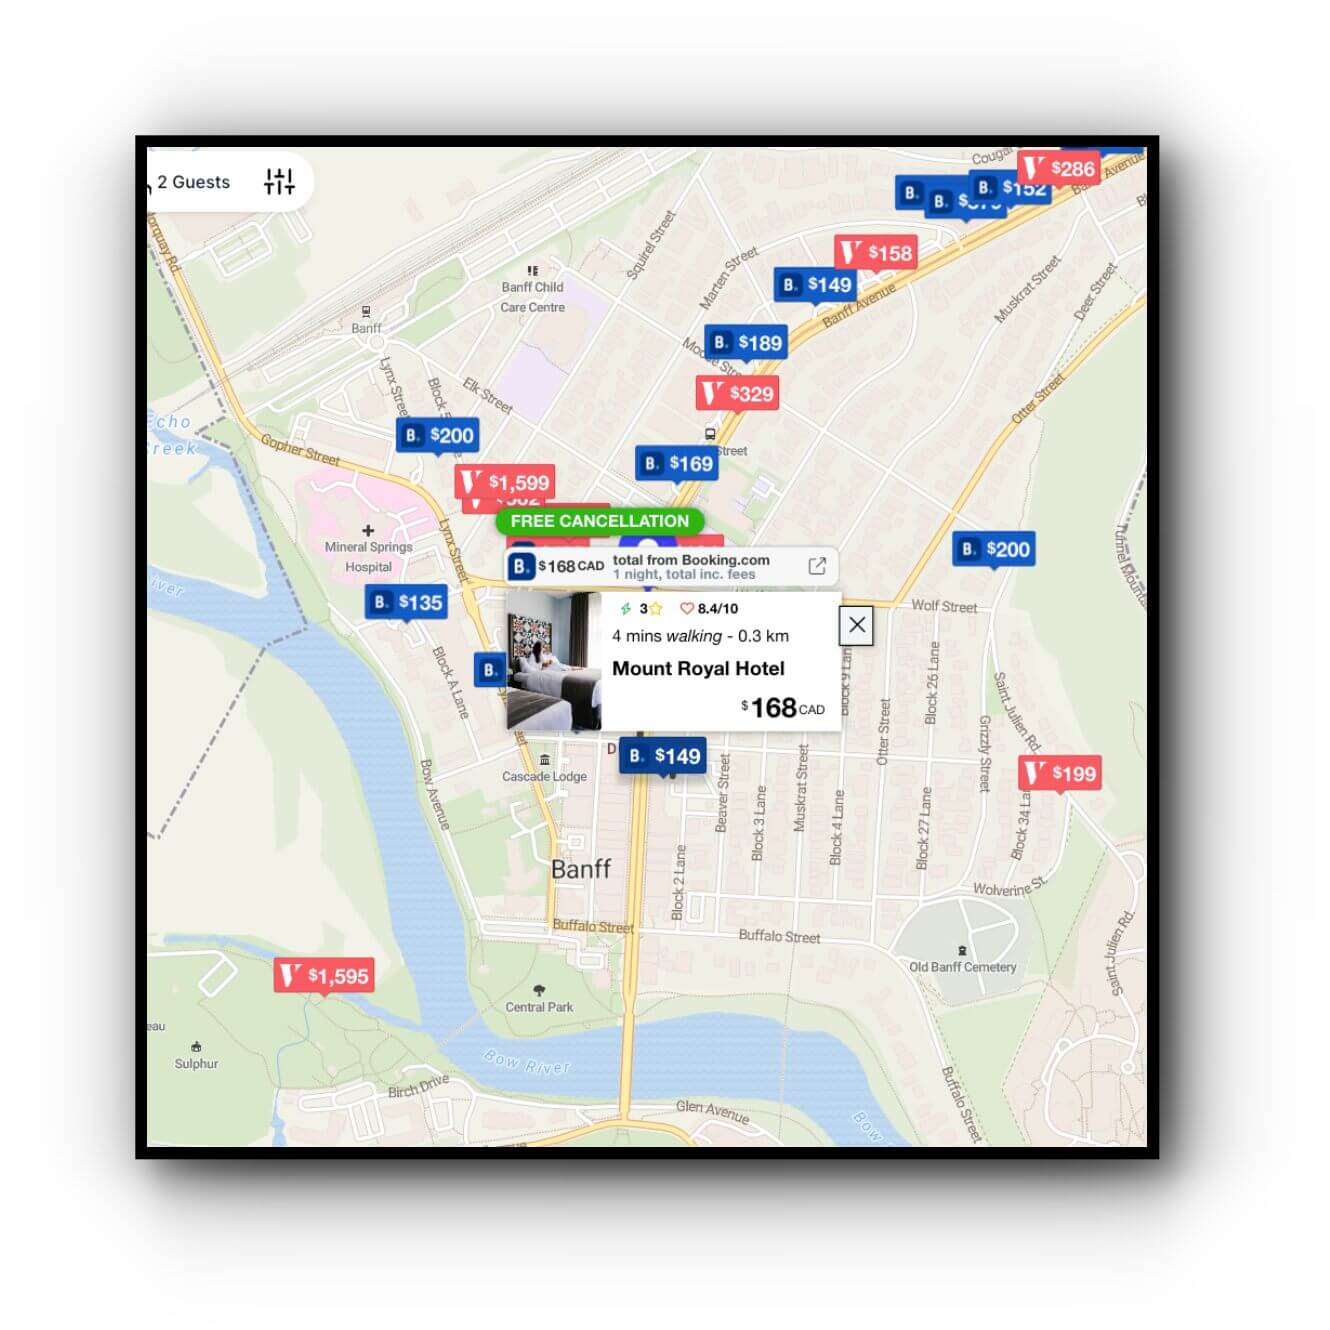 banff hotel deals map on about us what we provide the traveller 1x1 mobile image 1000